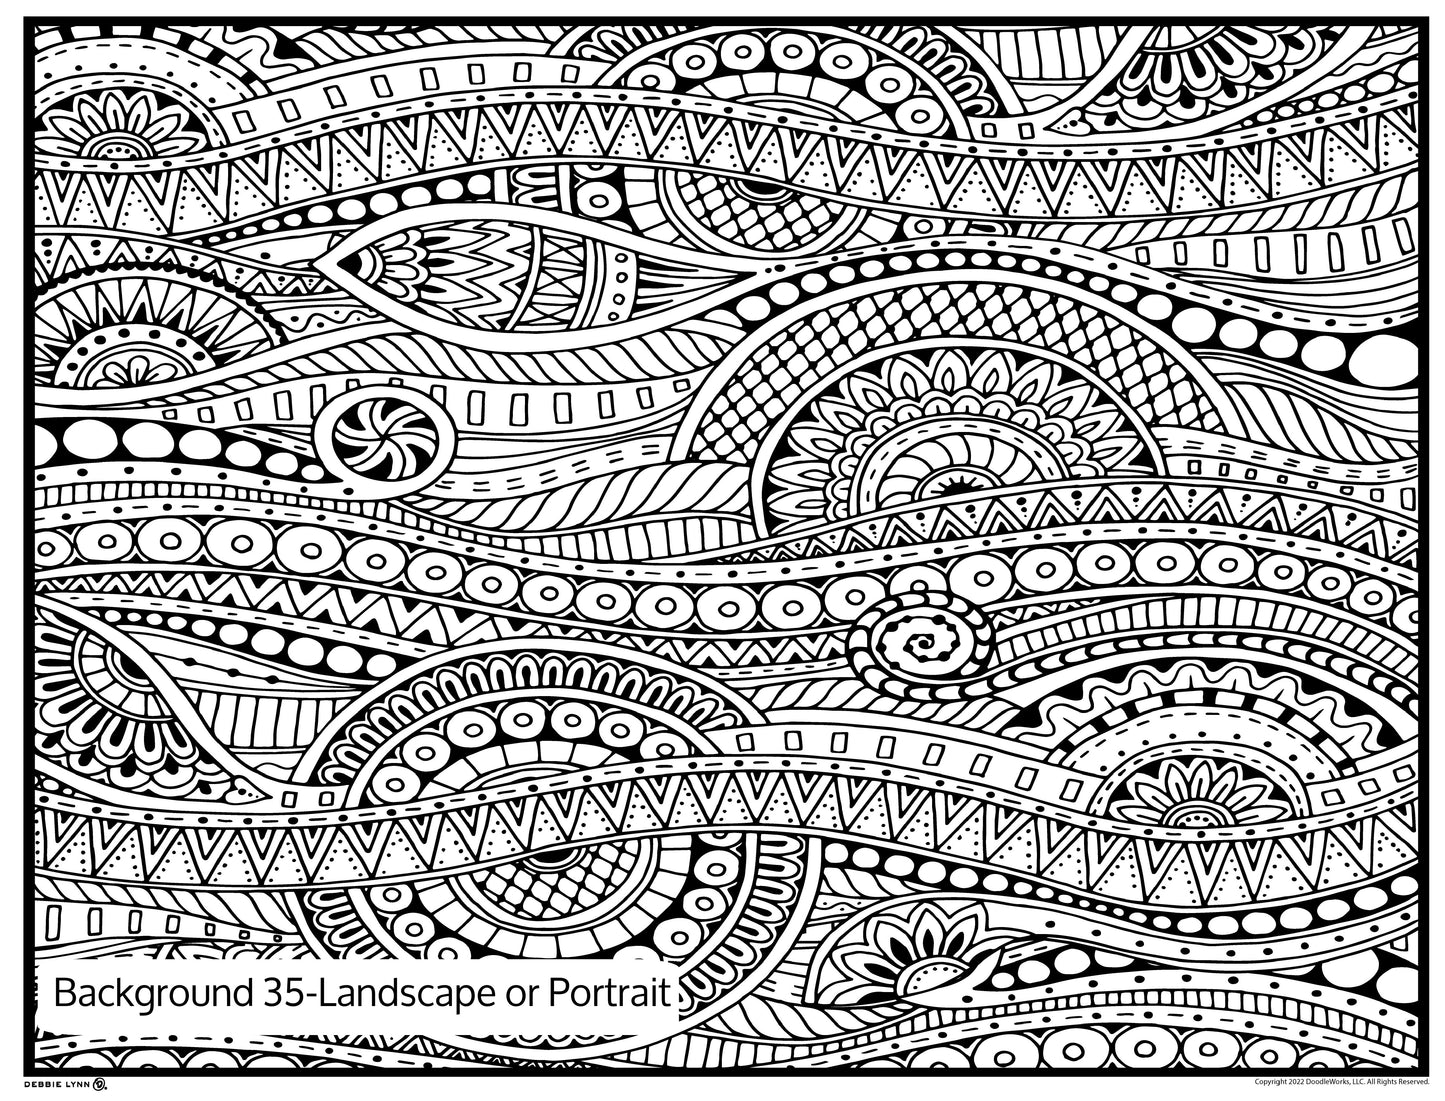 Background 35 Custom Personalized Giant Coloring Poster 46"x60"